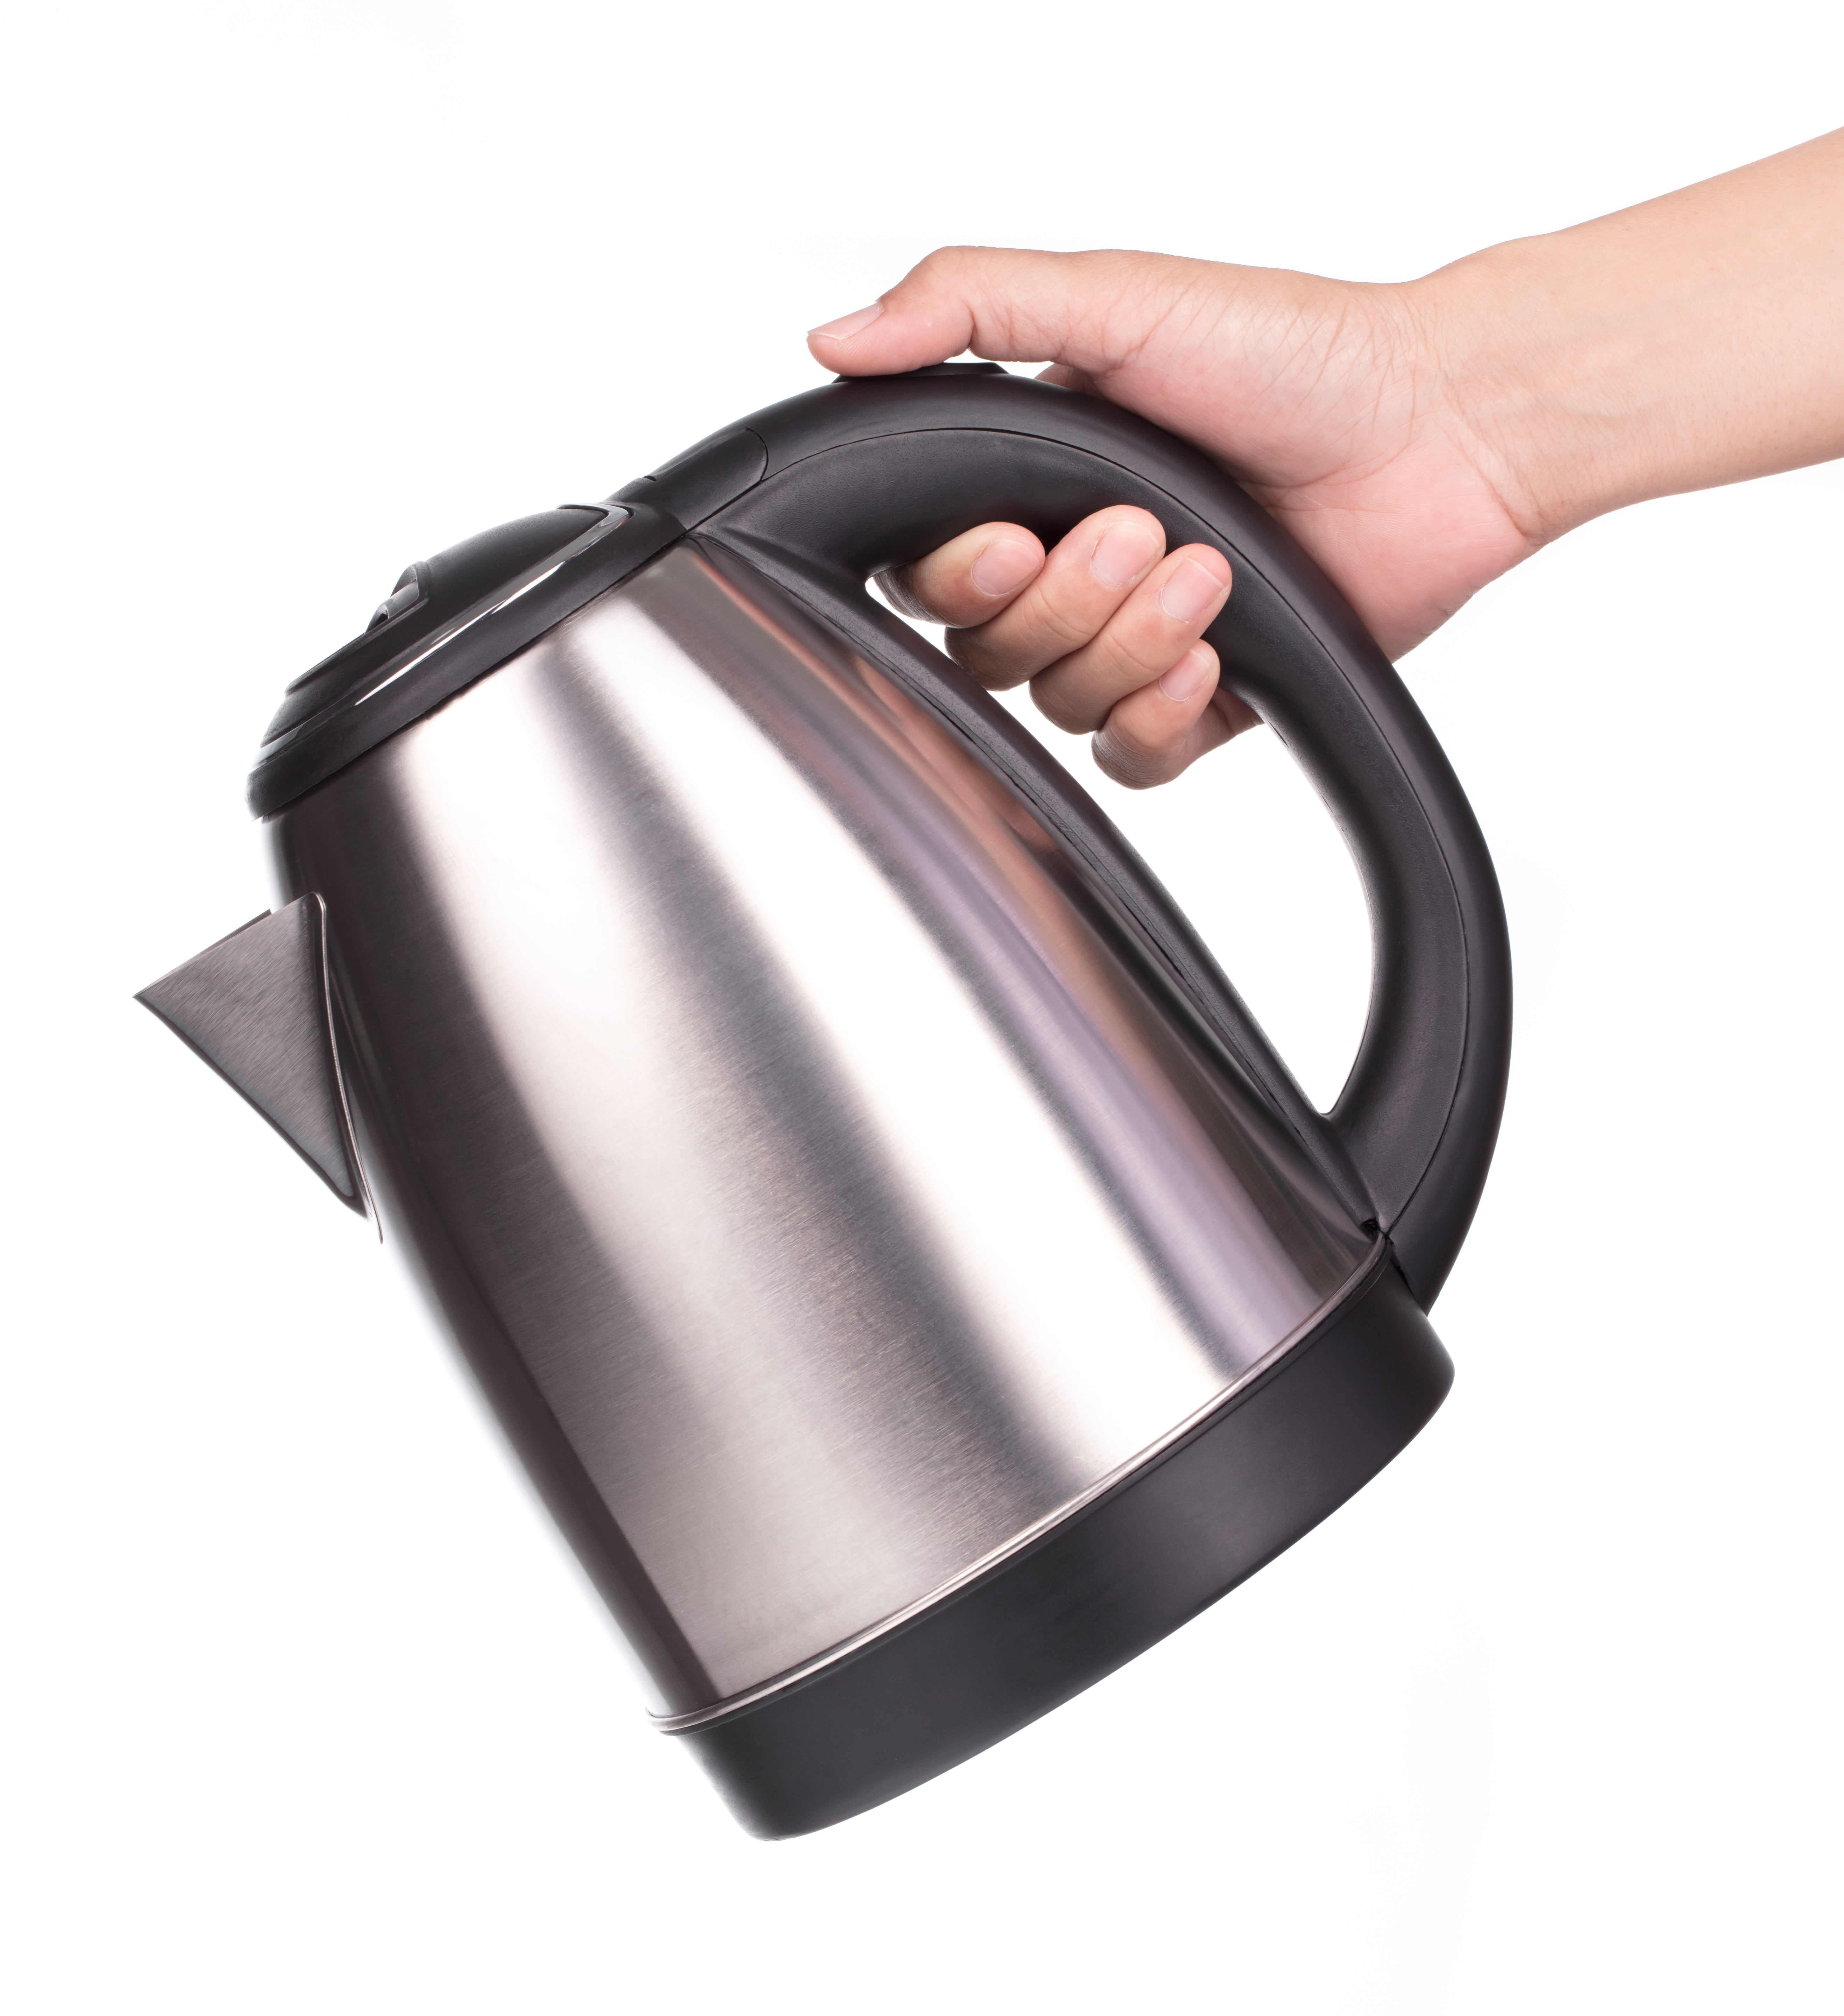 A person holding a modern electric kettle | Source: Shutterstock